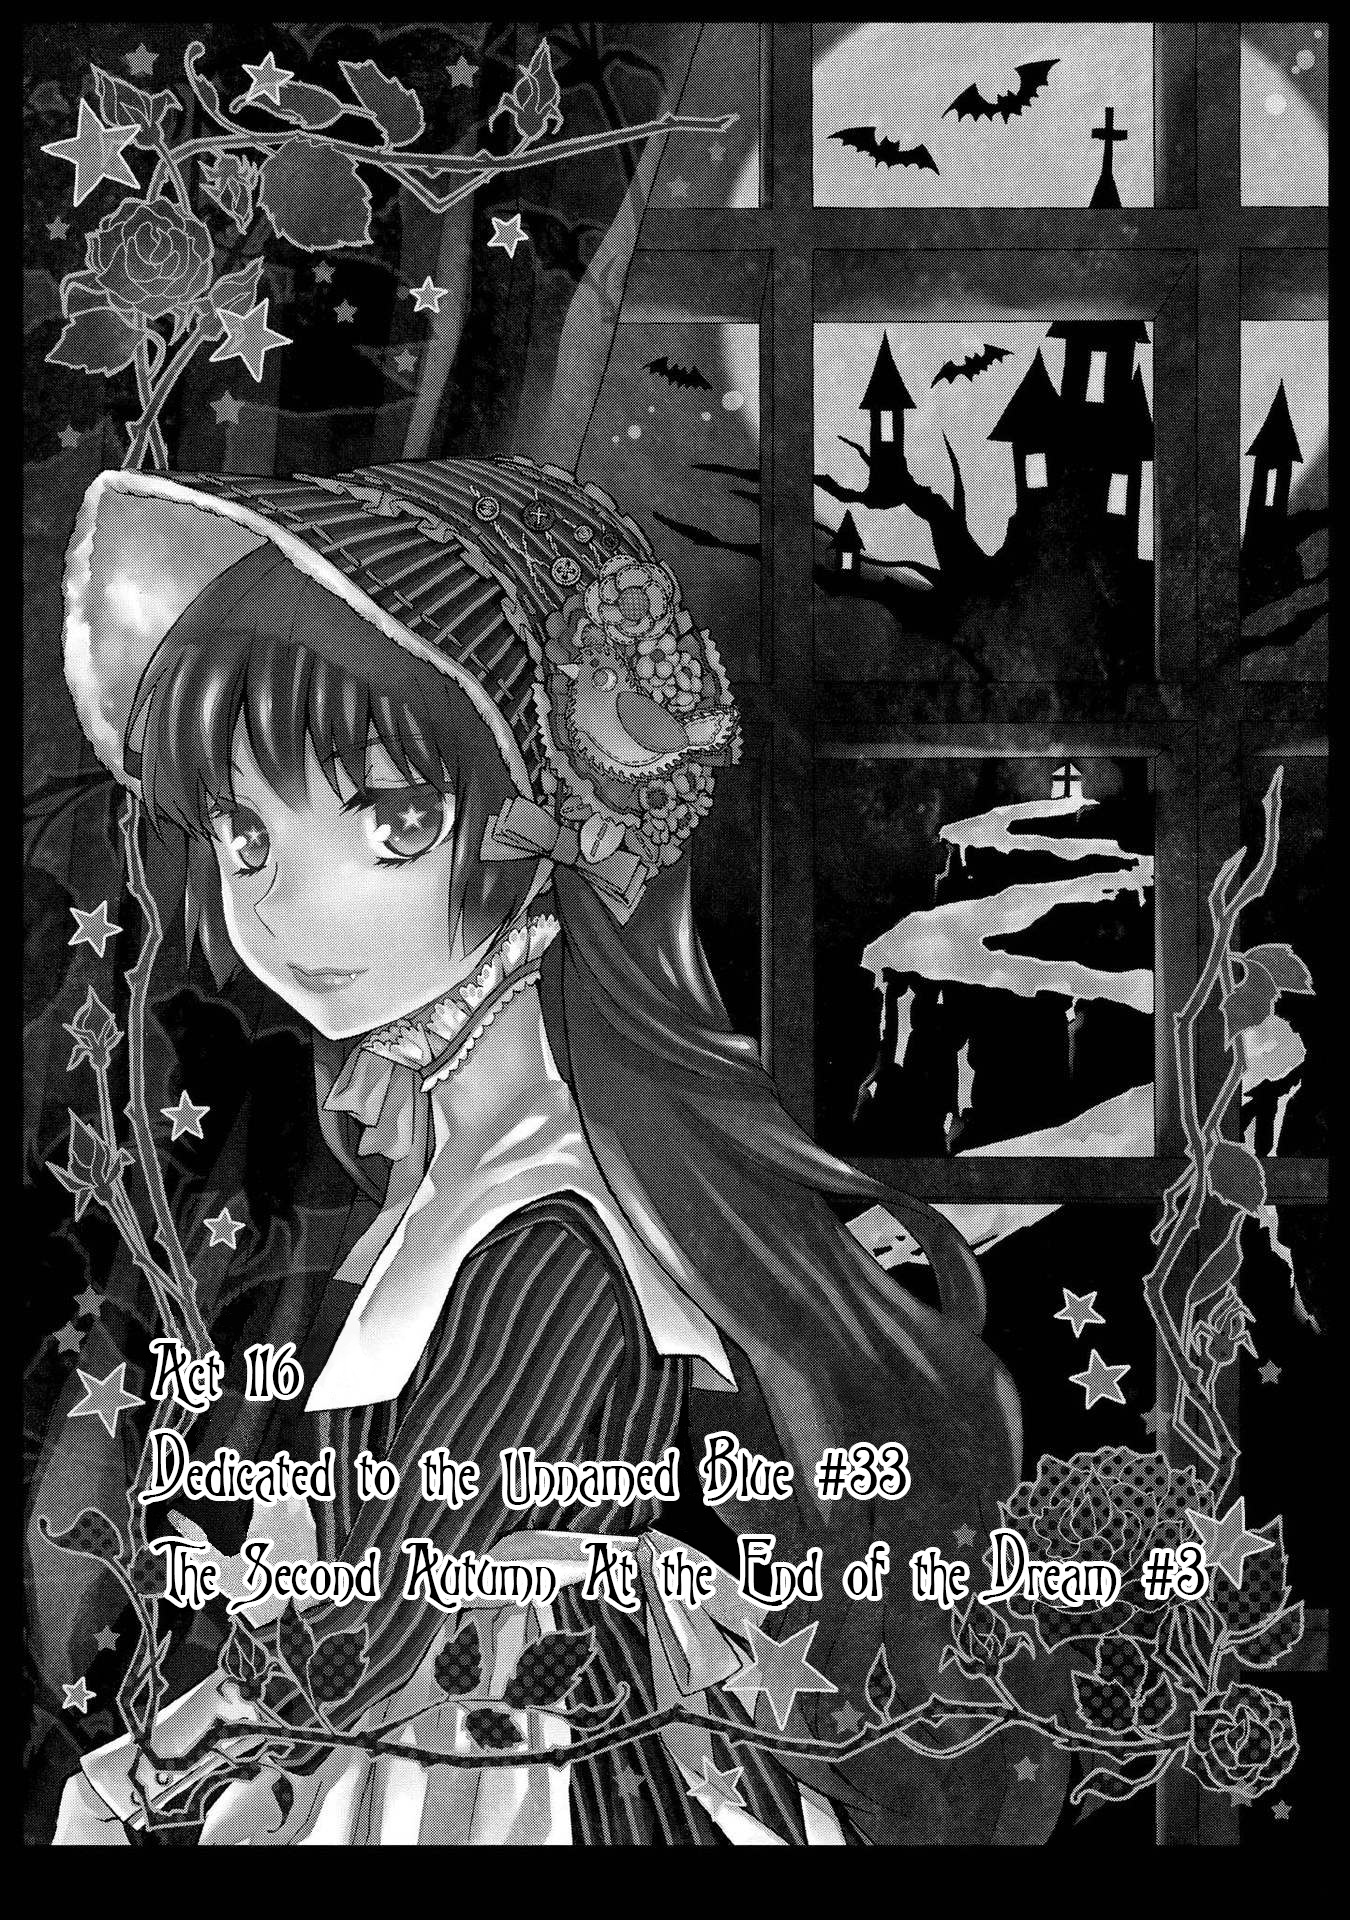 Hatenkou Yuugi Vol.17 Chapter 116: Dedicated To The Unnamed Blue #33 - The Second Autumn At The End Of The Dream #3 - Picture 1